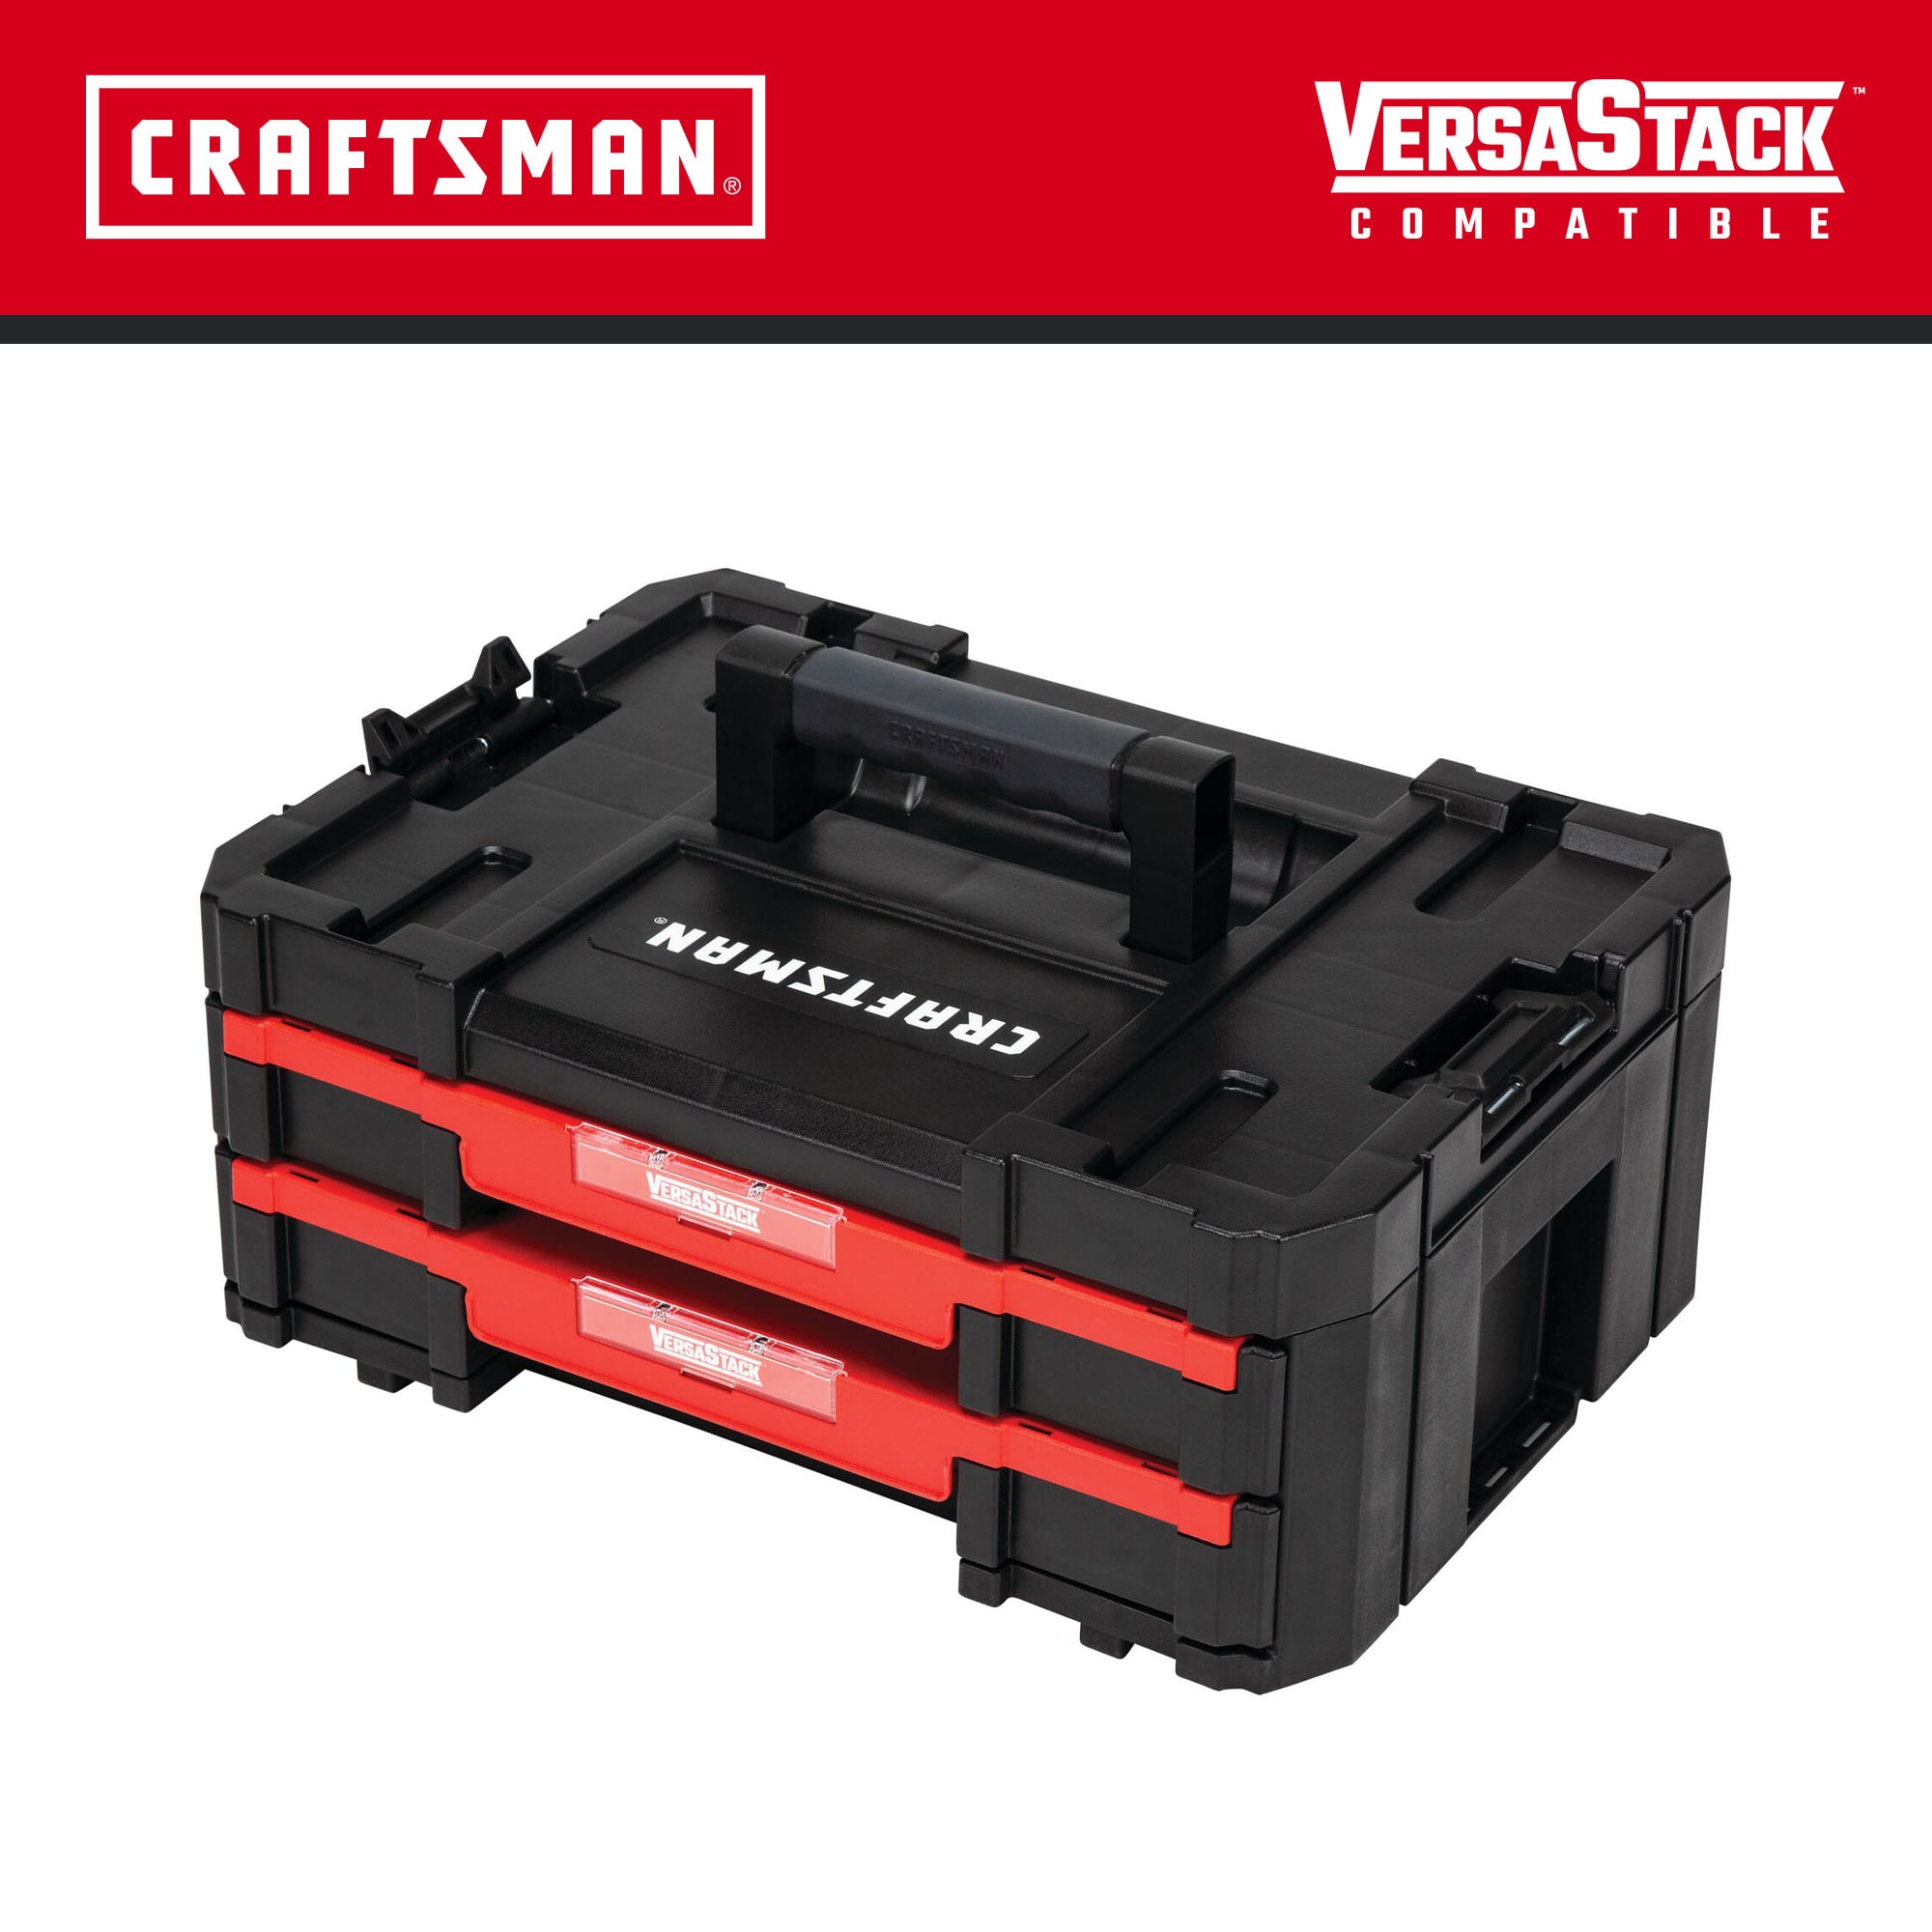 CRAFTSMAN Plastic Portable Tool Boxes at